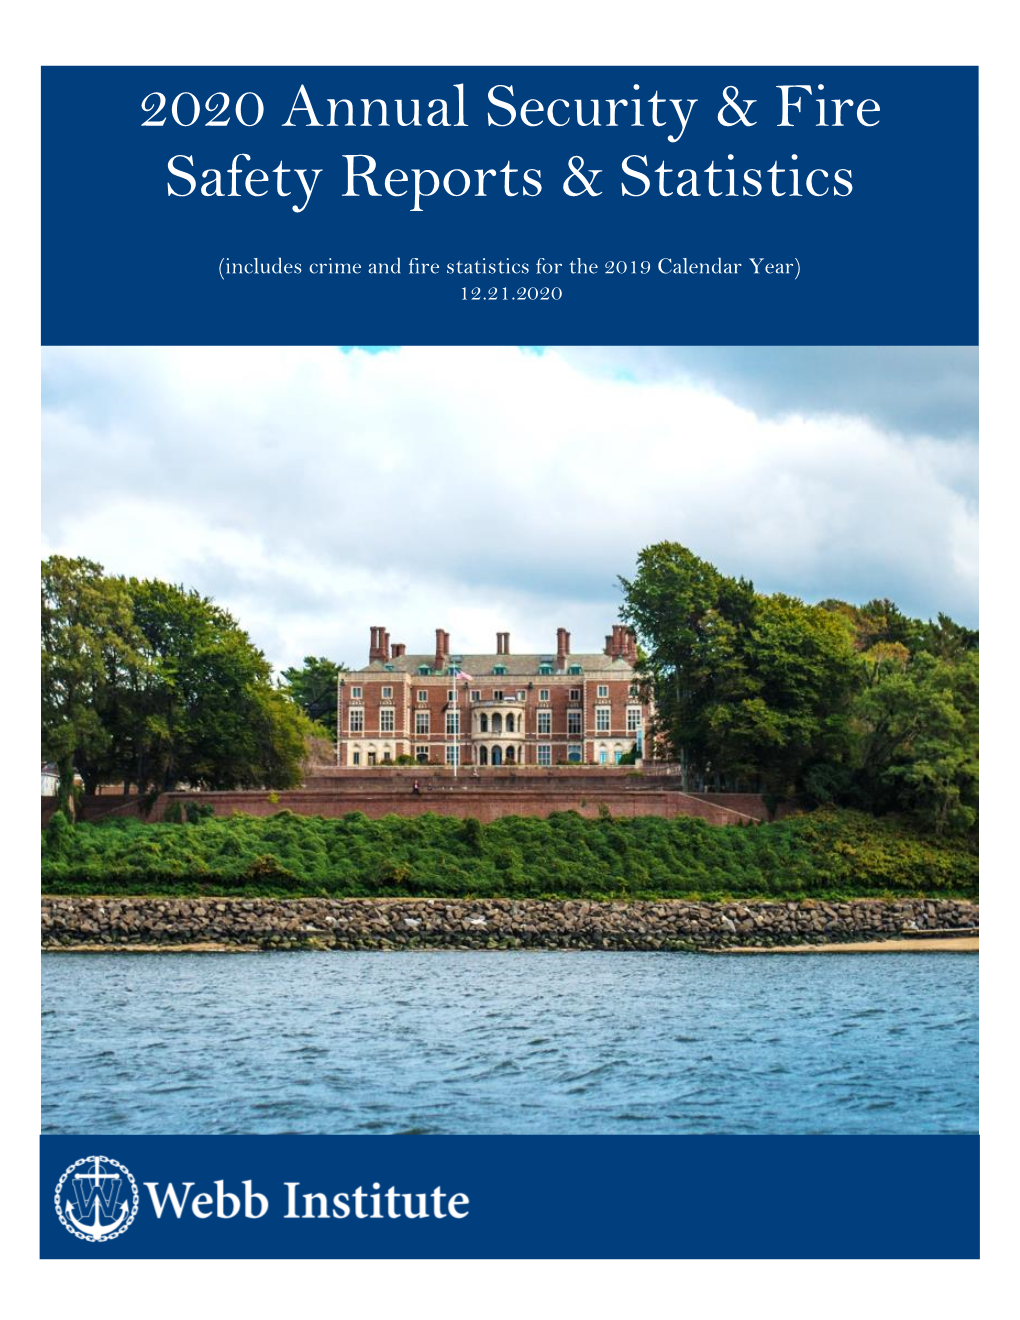 2020 Annual Security & Fire Safety Reports & Statistics